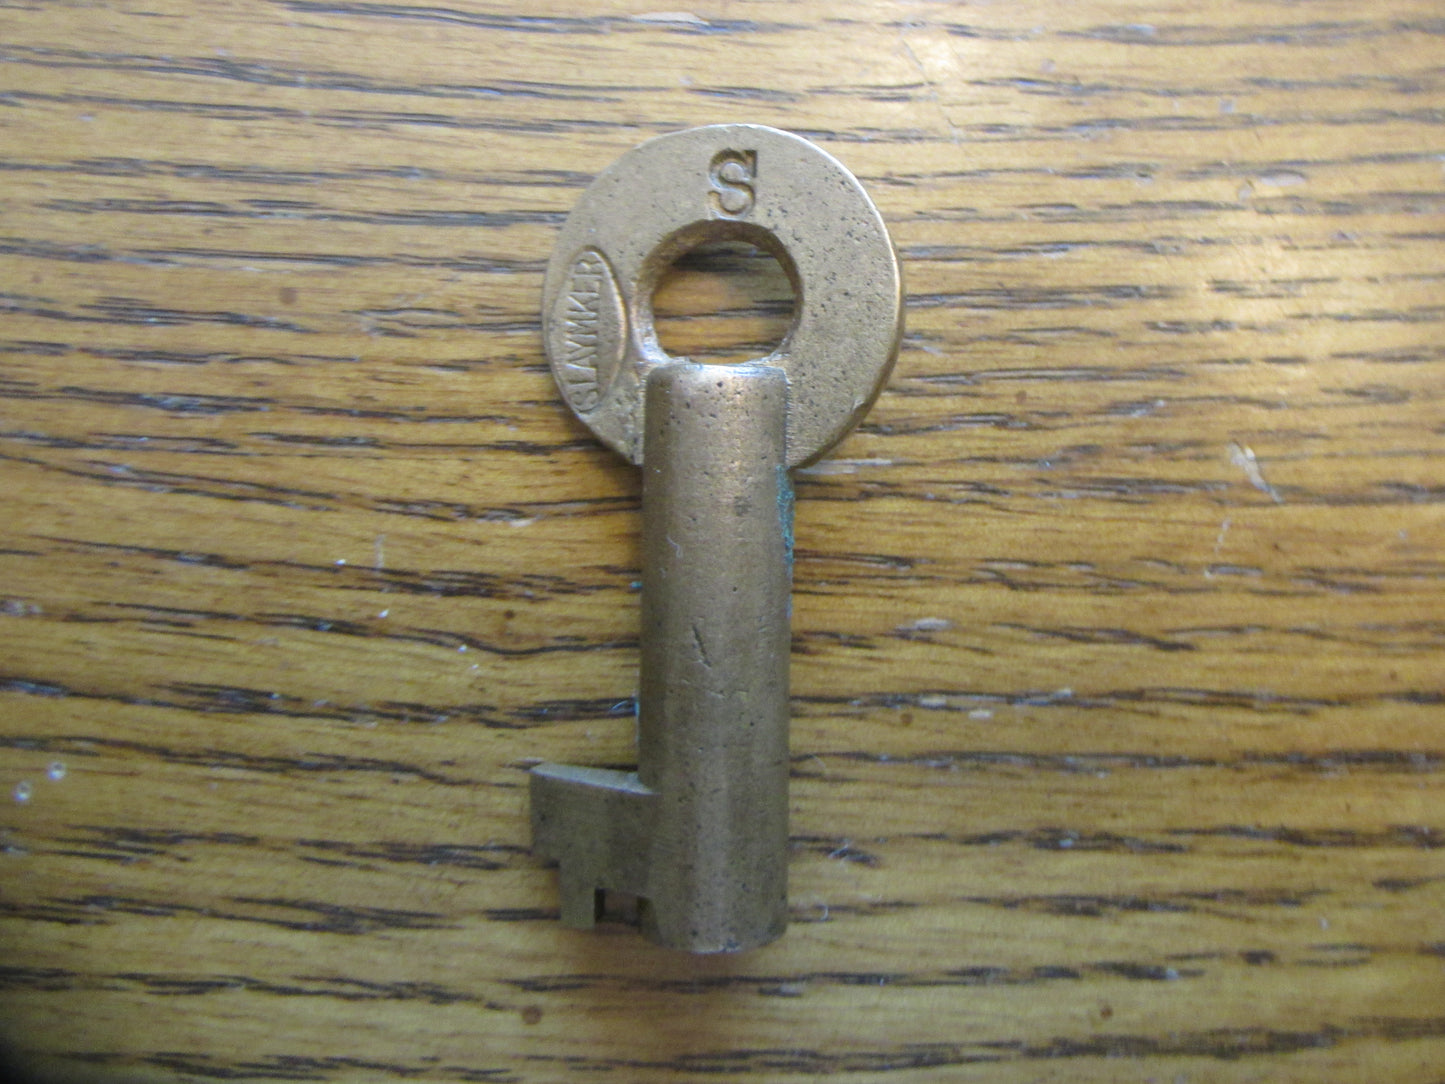 Northern Pacific RR Key